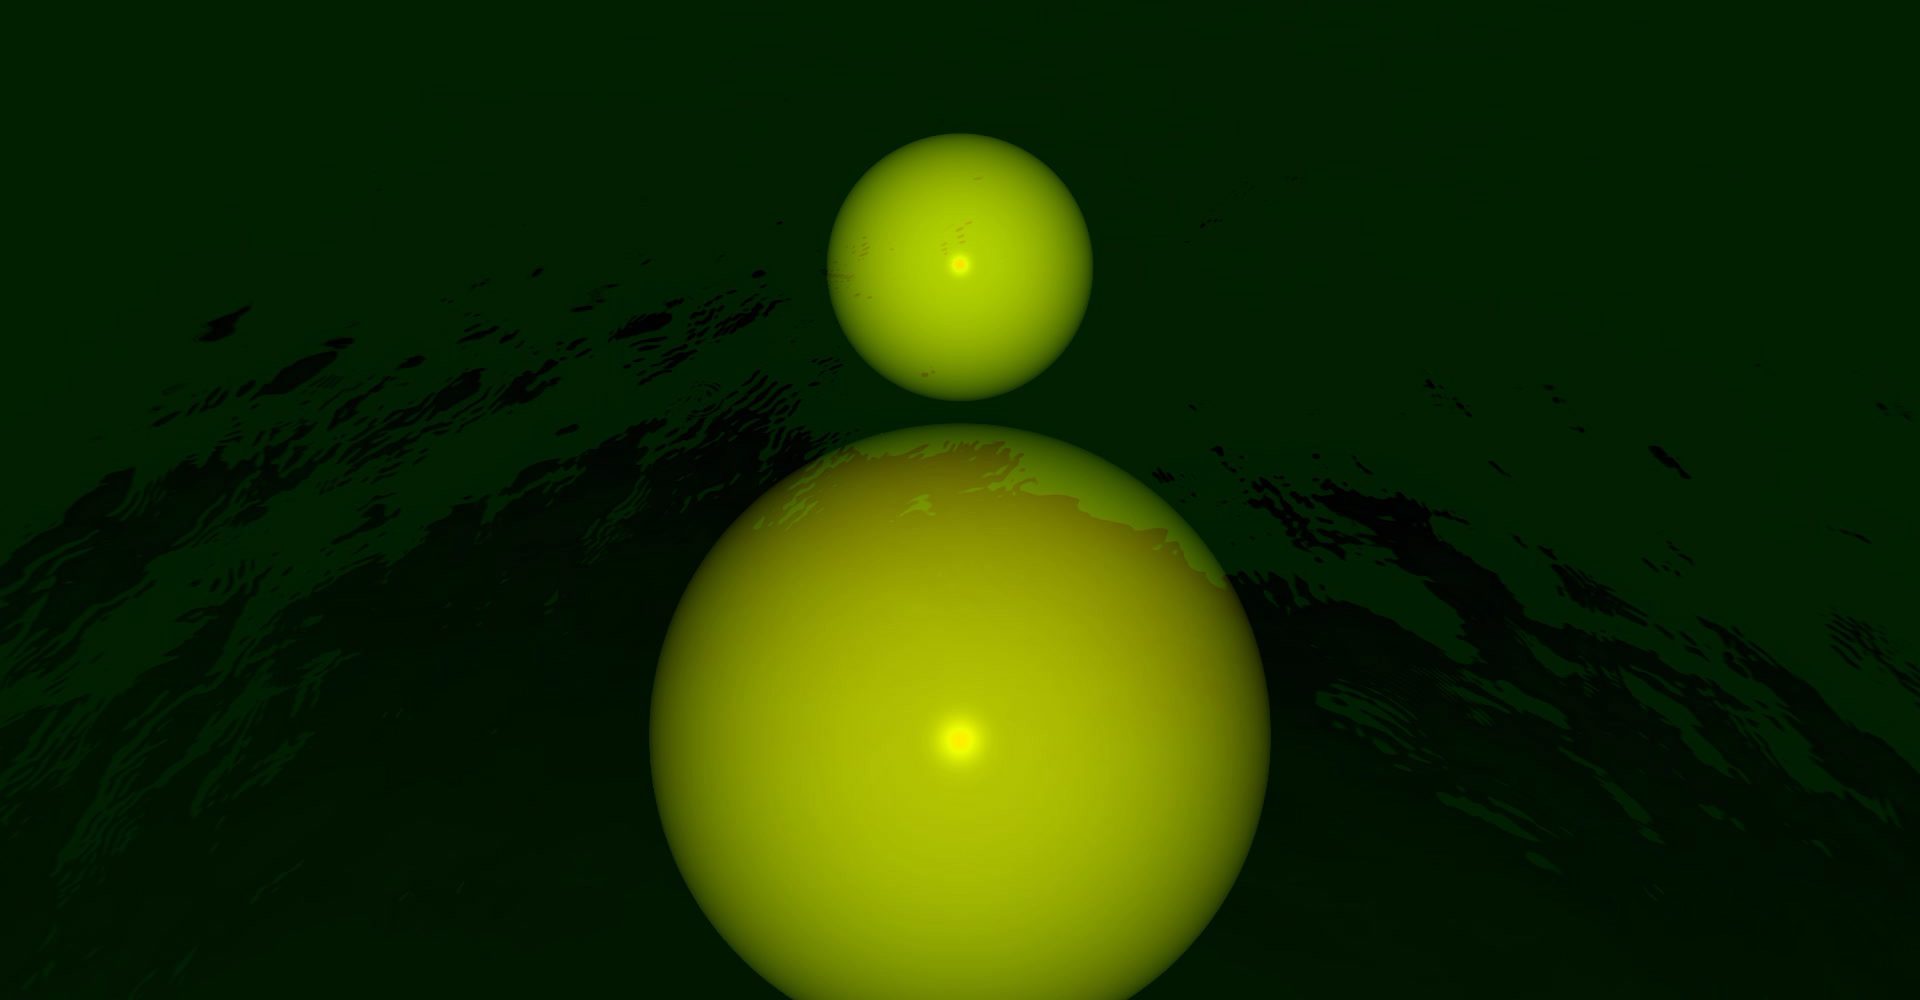 Two green globes, one on top of the other. The lower one is larger.